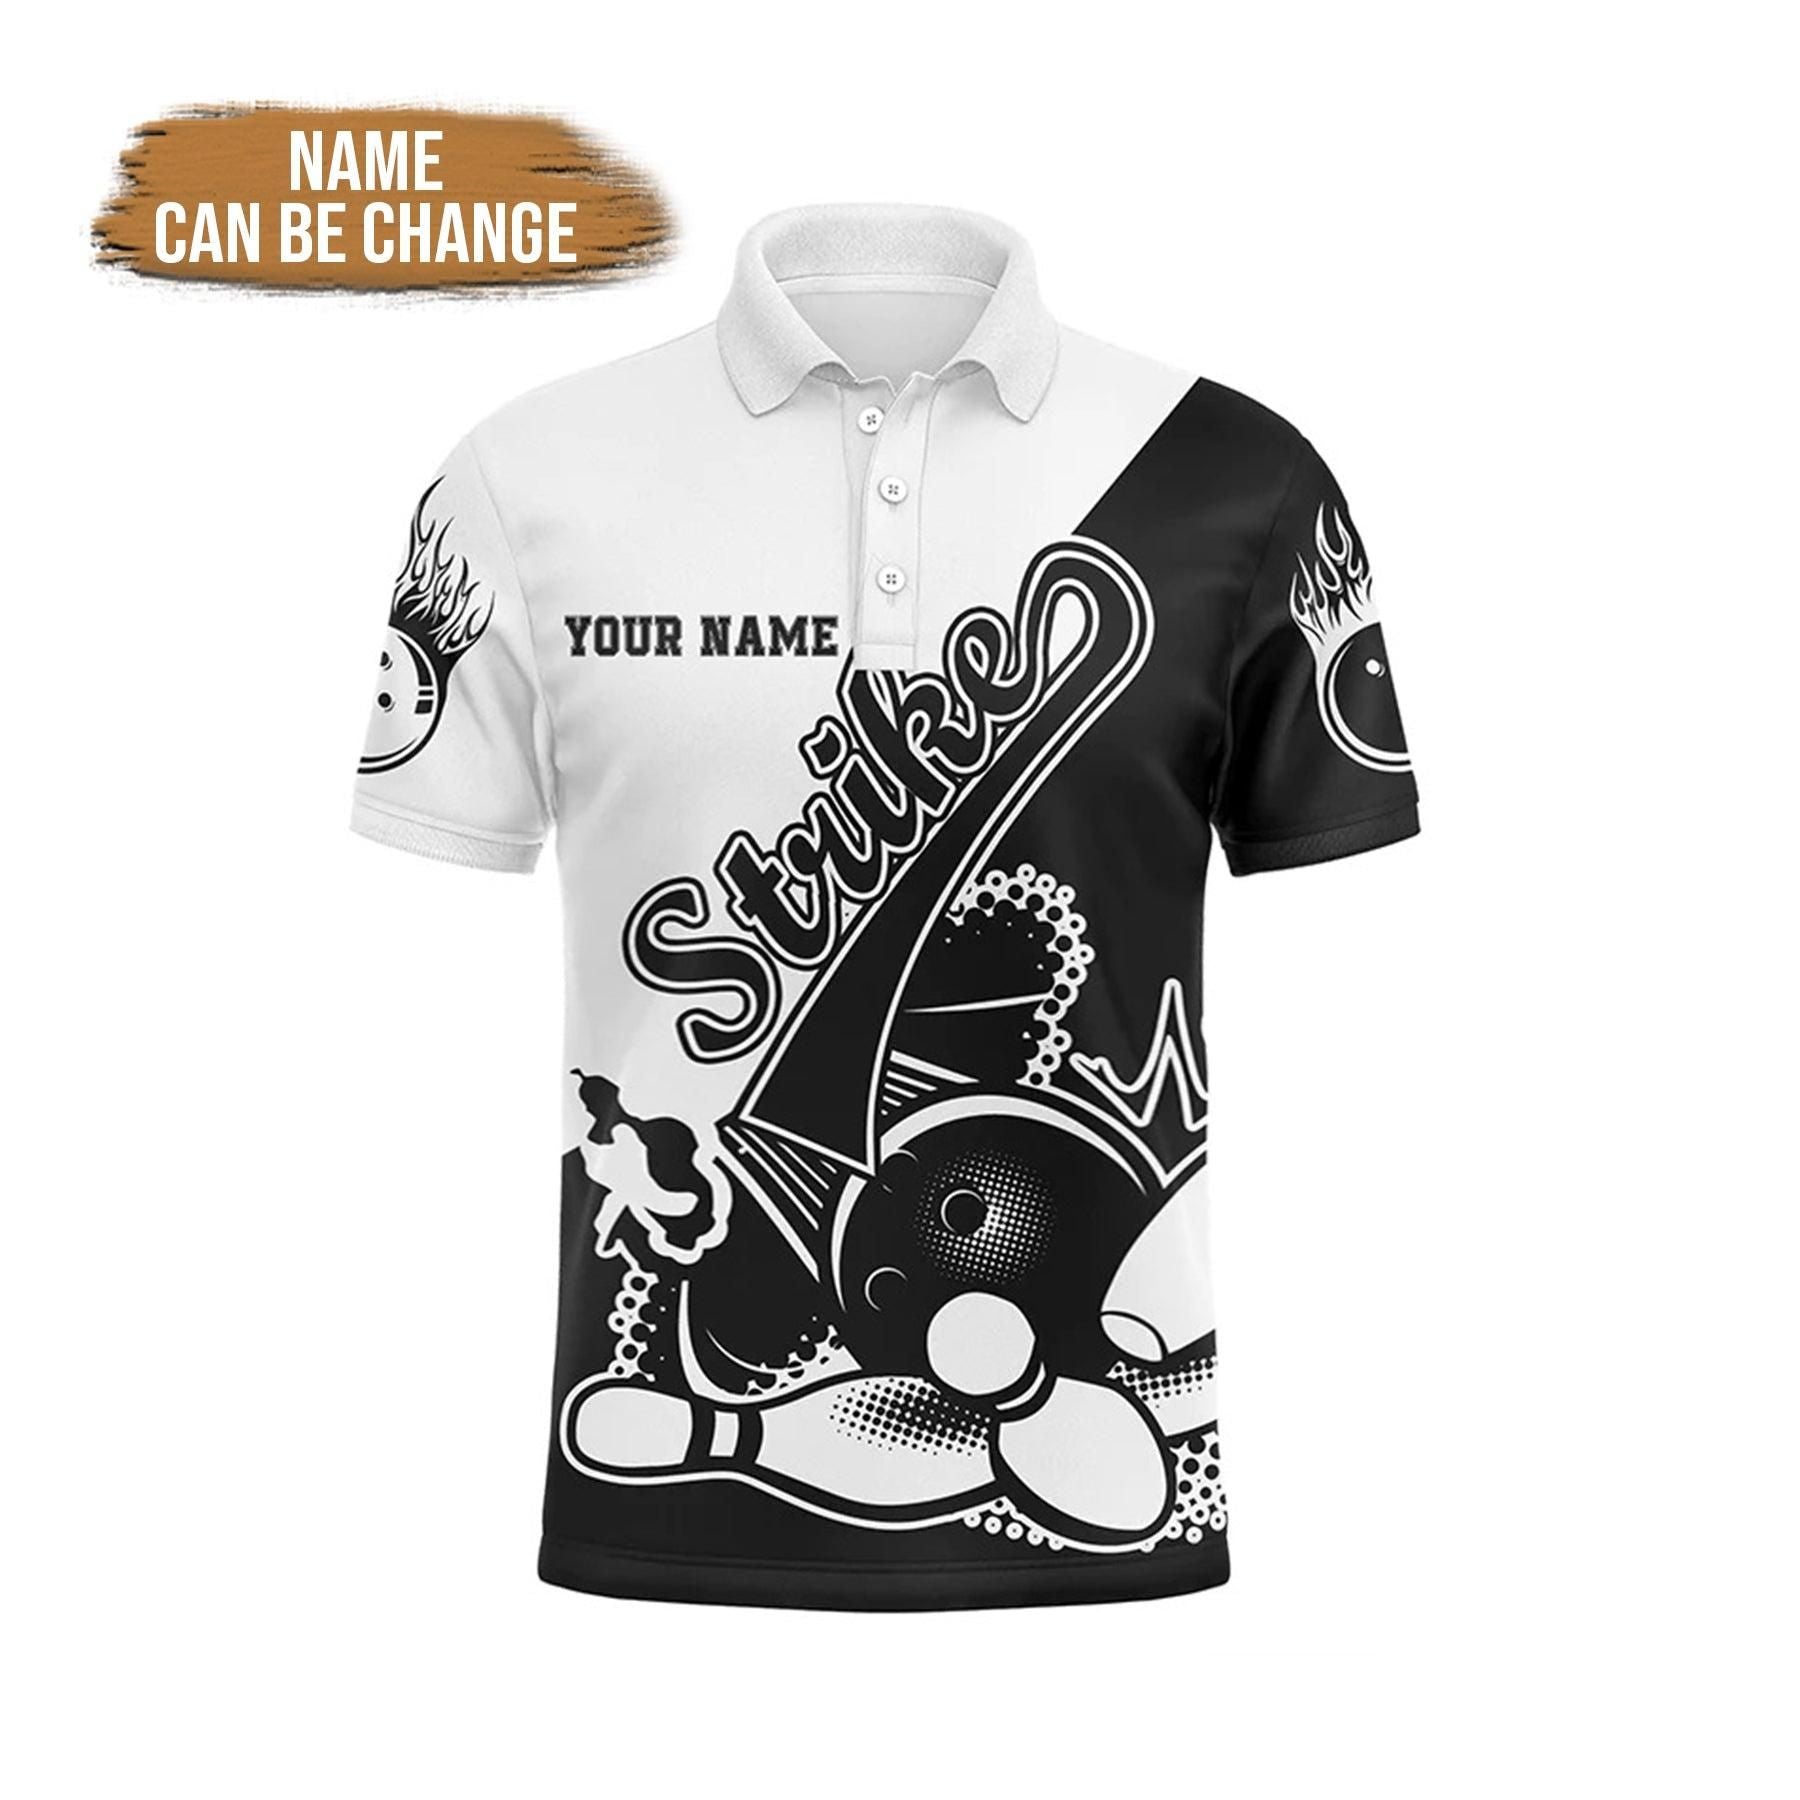 Bowling Custom Men Polo Shirt - Customize Name Bowling Strike Bowling Ball And Pins Personalized Bowling Polo Shirt - Perfect Gift For Friend, Family